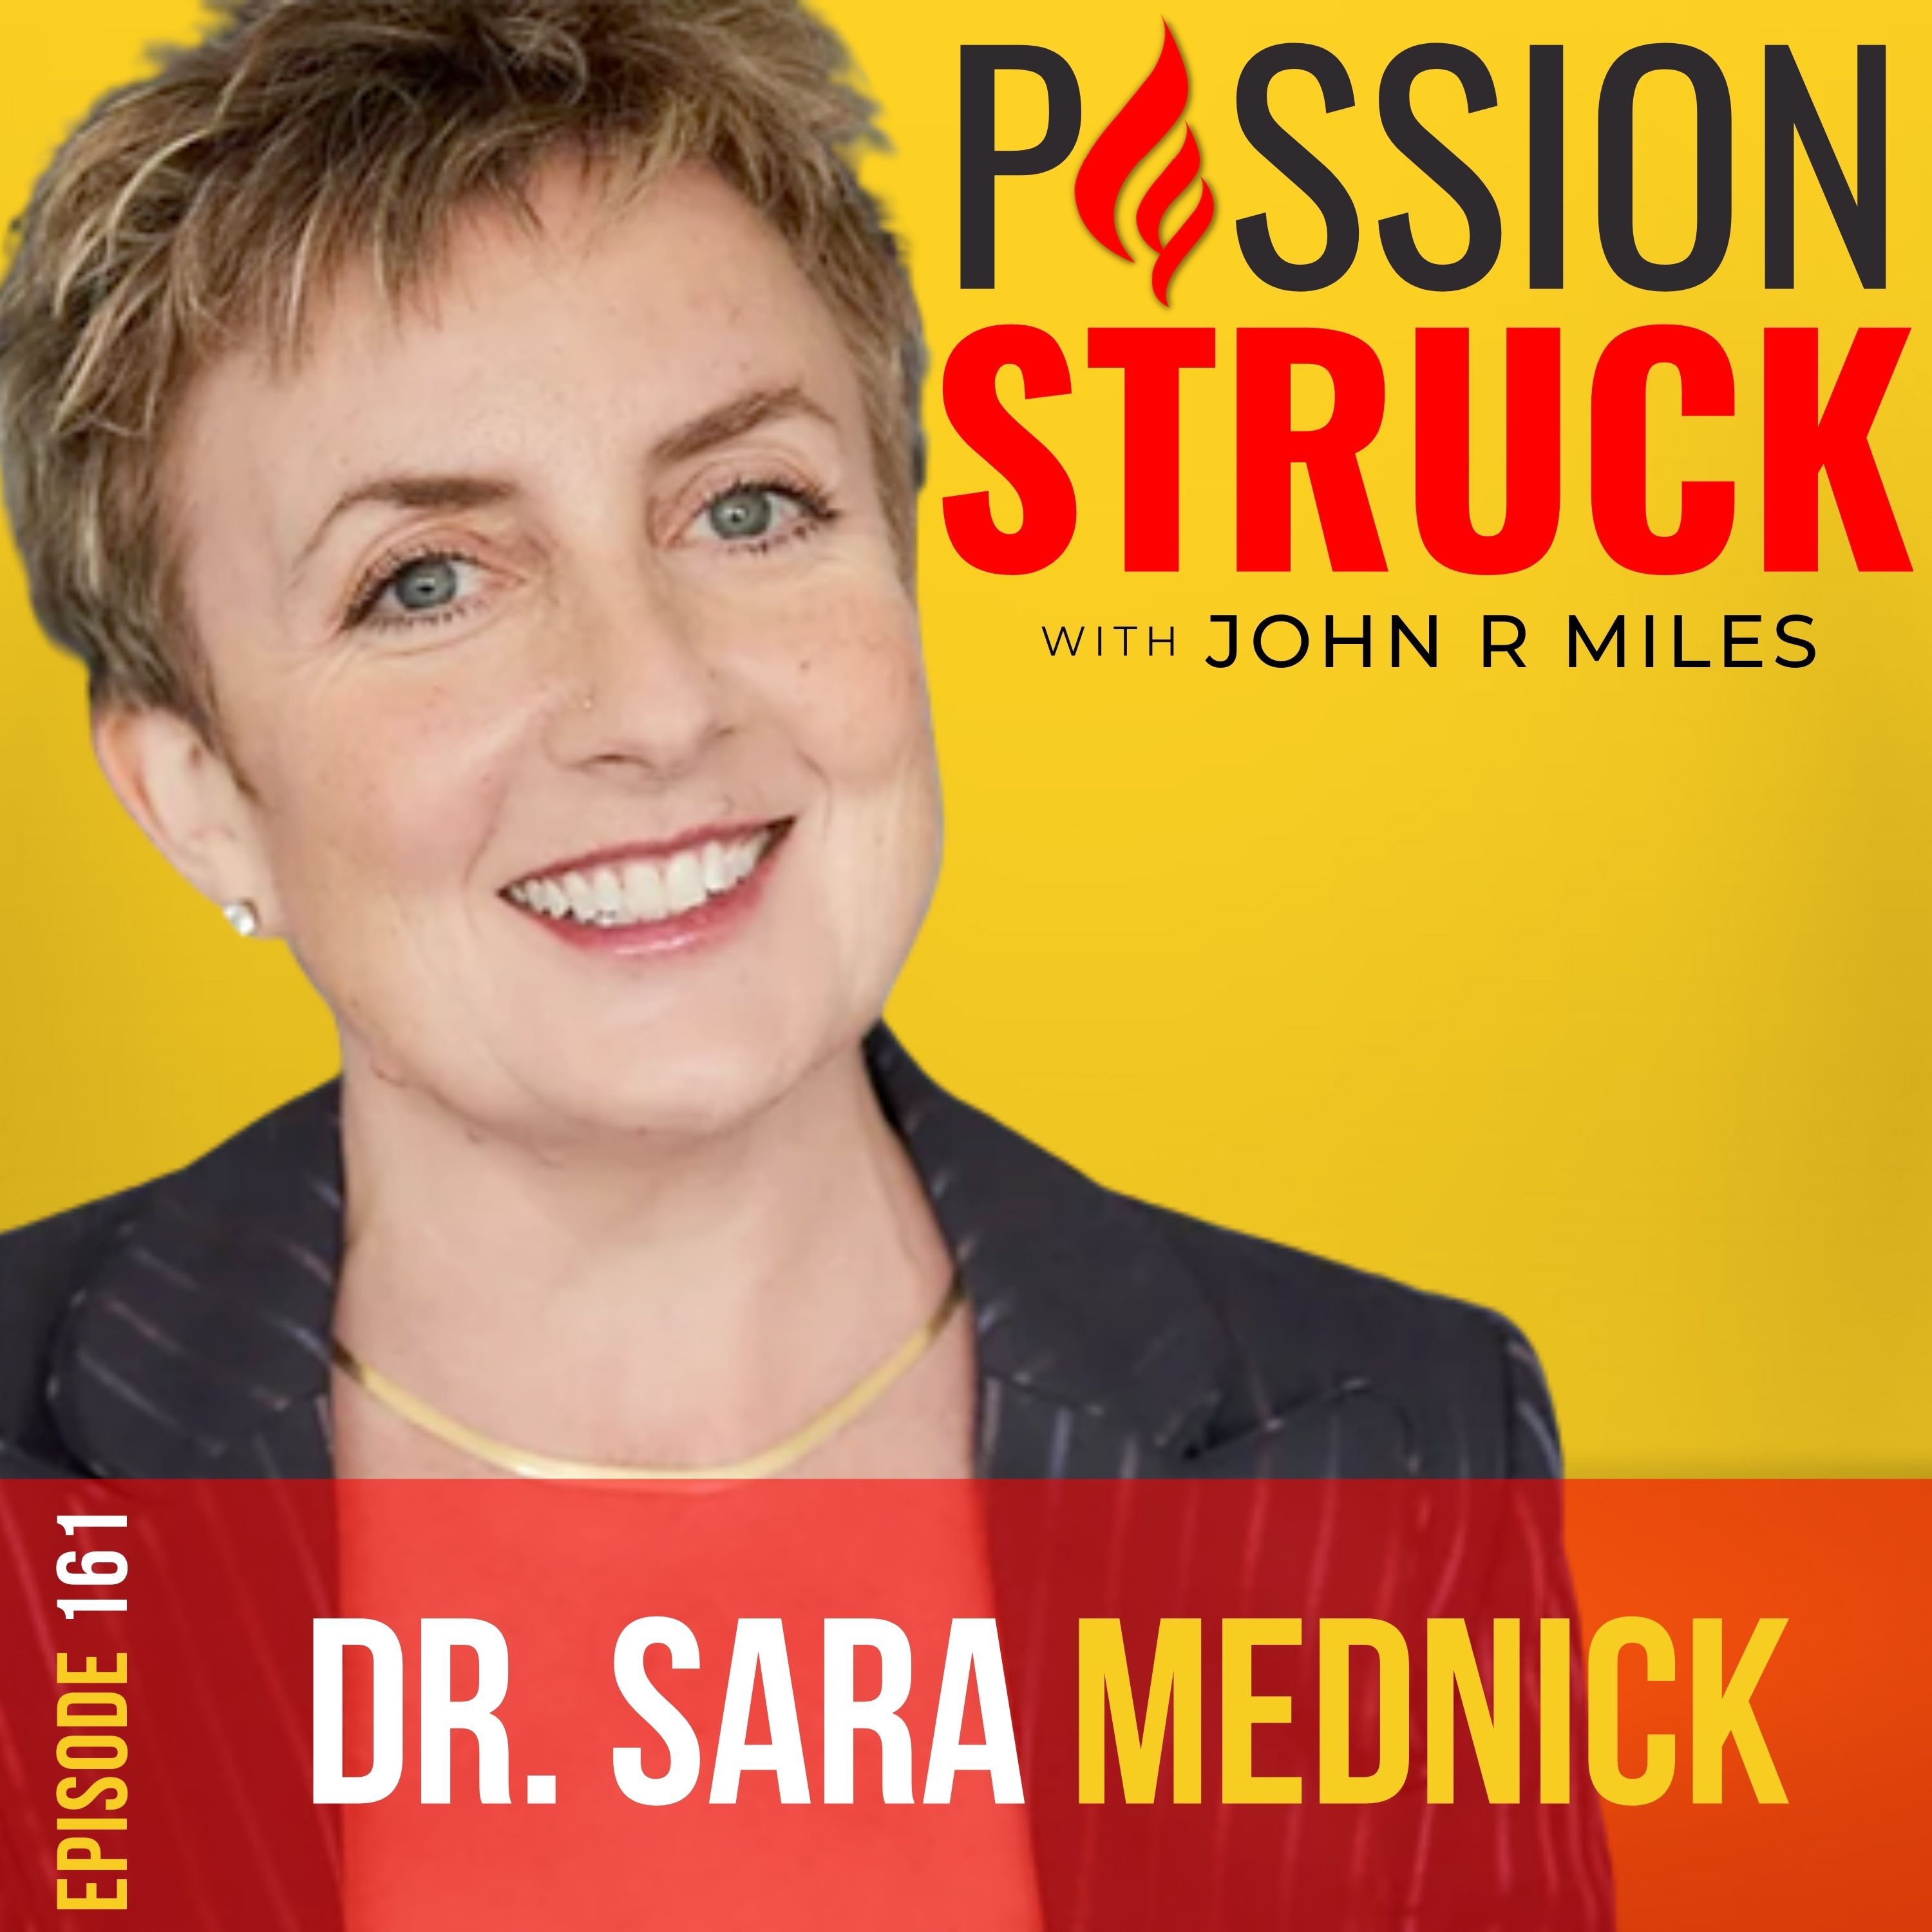 Passion Struck with John R. Miles thumbnail for episode 161 with Dr. Sara Mednick